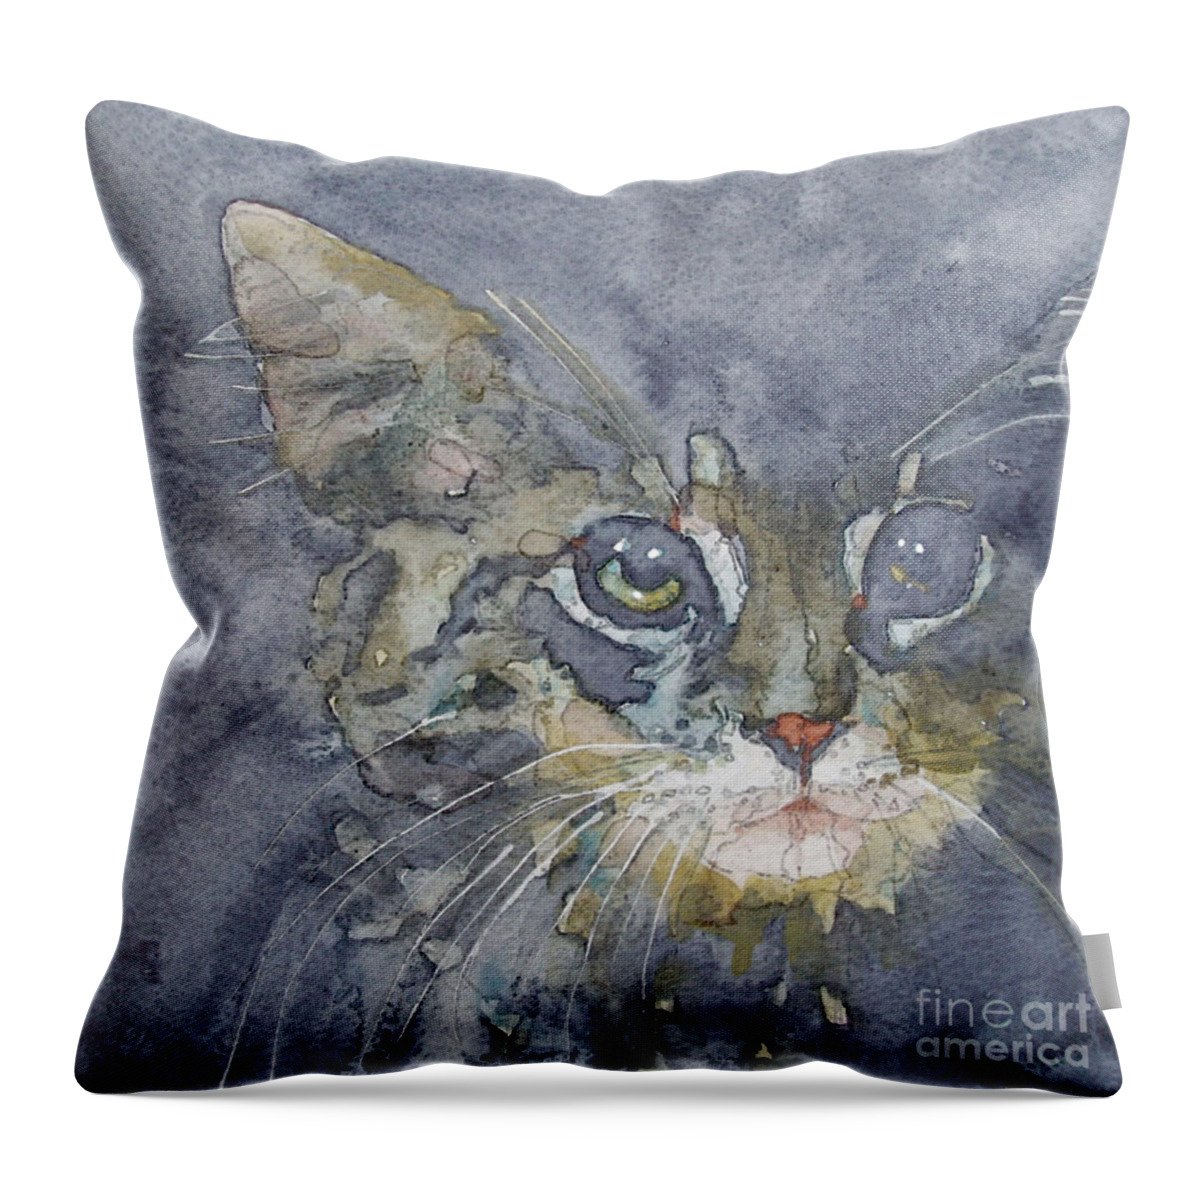 Tabby Throw Pillow featuring the painting Out The Blue You Came To Me by Paul Lovering